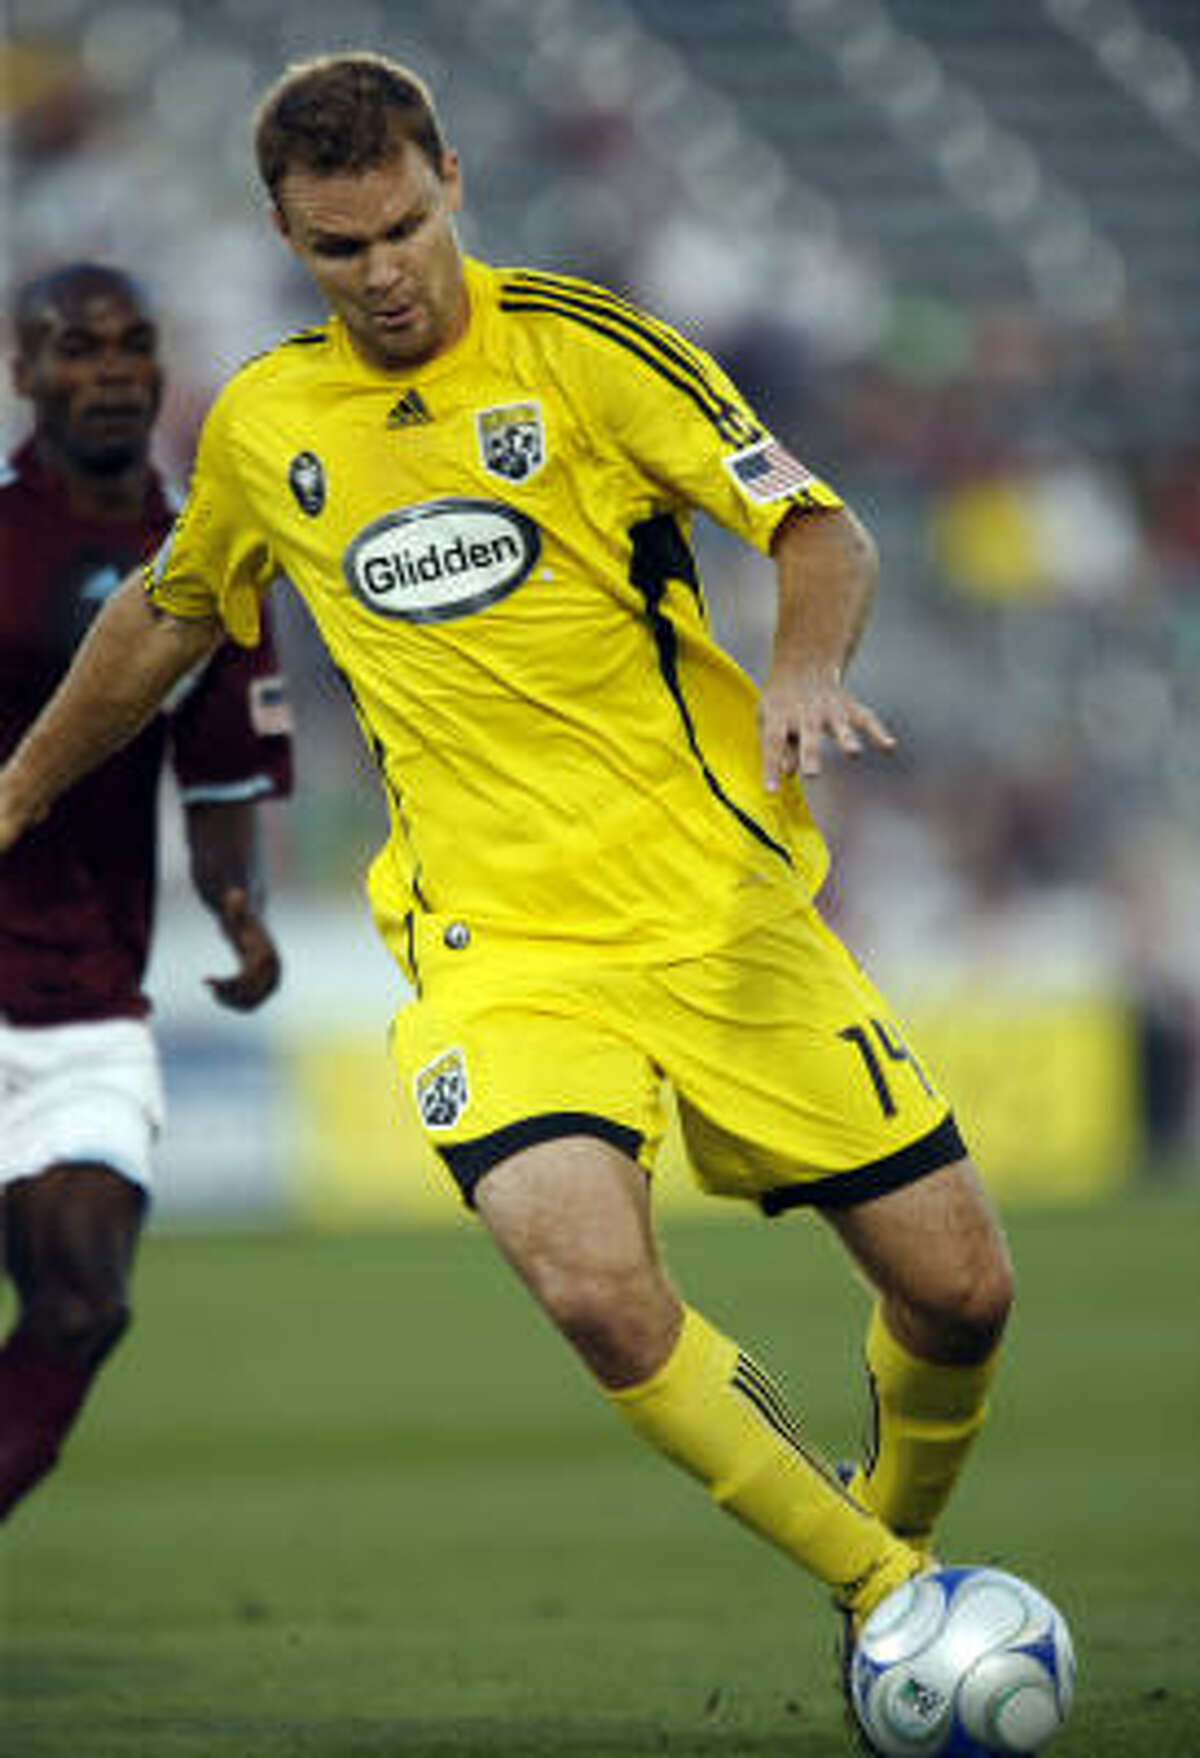 Defender Chad Marshall, Columbus Crew The six-year MLS veteran has established himself as the top center back in League. This season he anchored a Columbus defense that allowed only 31 goals, en route to its second straight Supporters’ Shield. Marshall was honored as Defender of the Year for the second straight season. He also scored four goals.